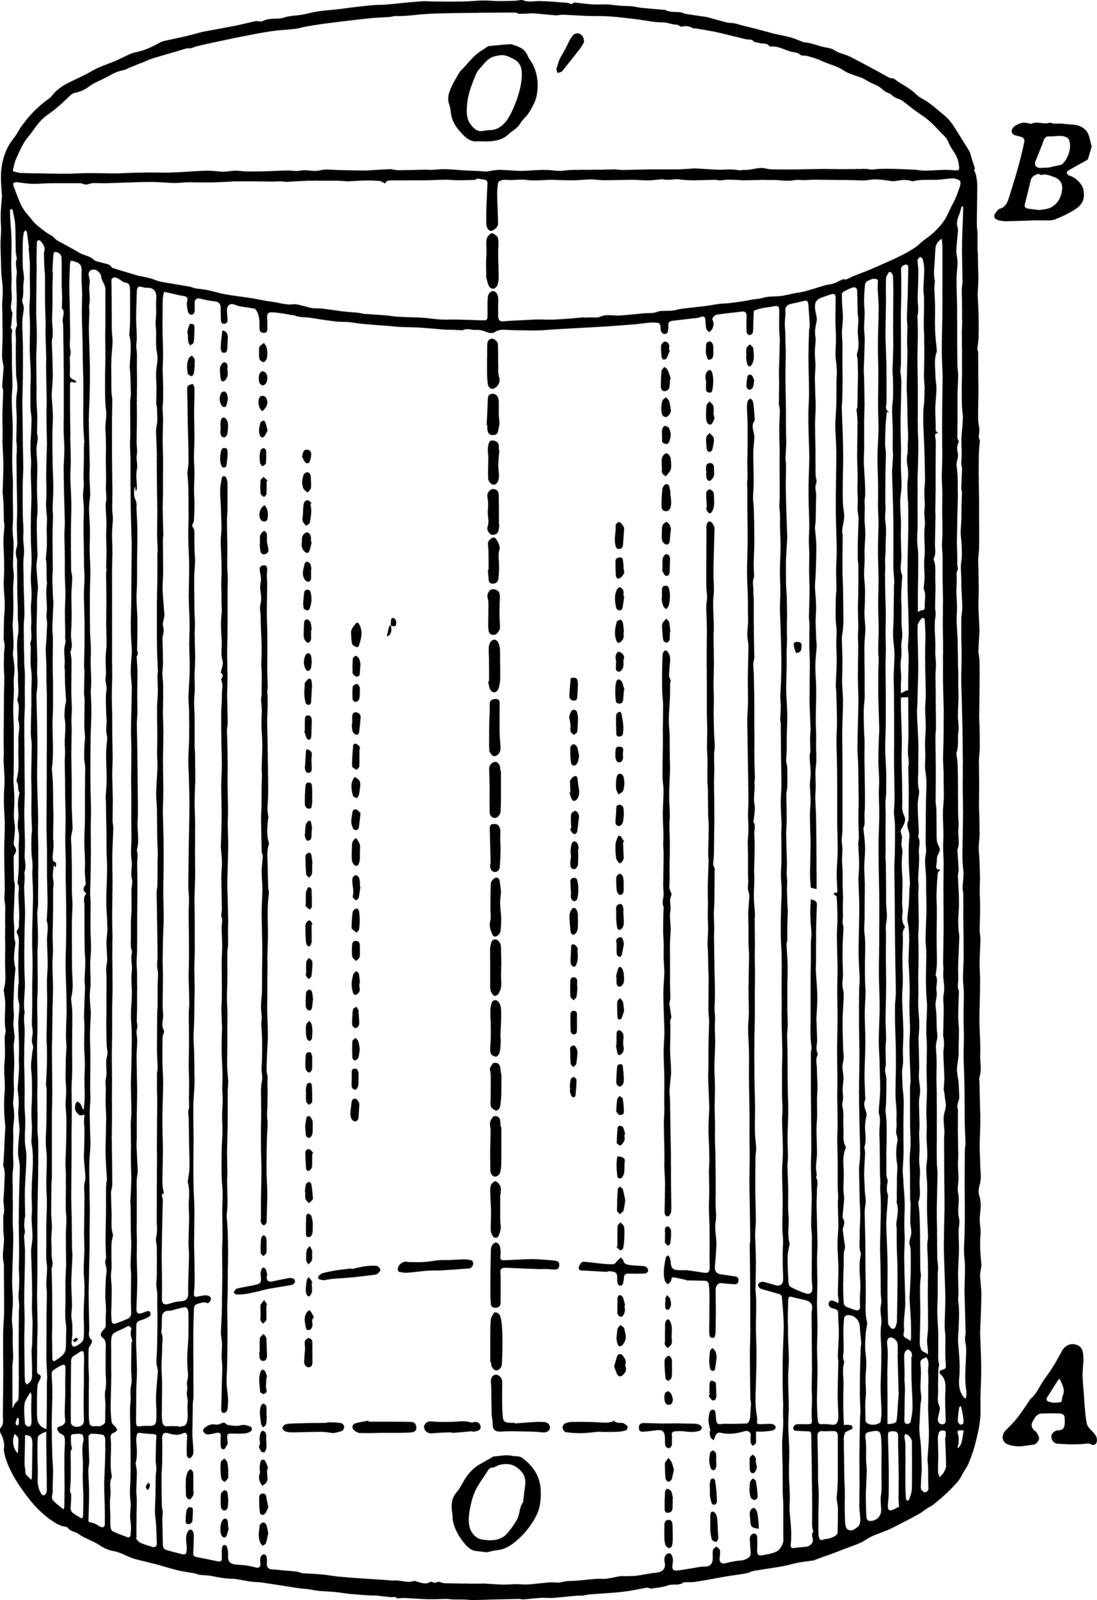 The axis of a right circular cylinder is the line joining the centers of the bases. Axis Line O is vertical to both circular bases, vintage line drawing or engraving illustration.